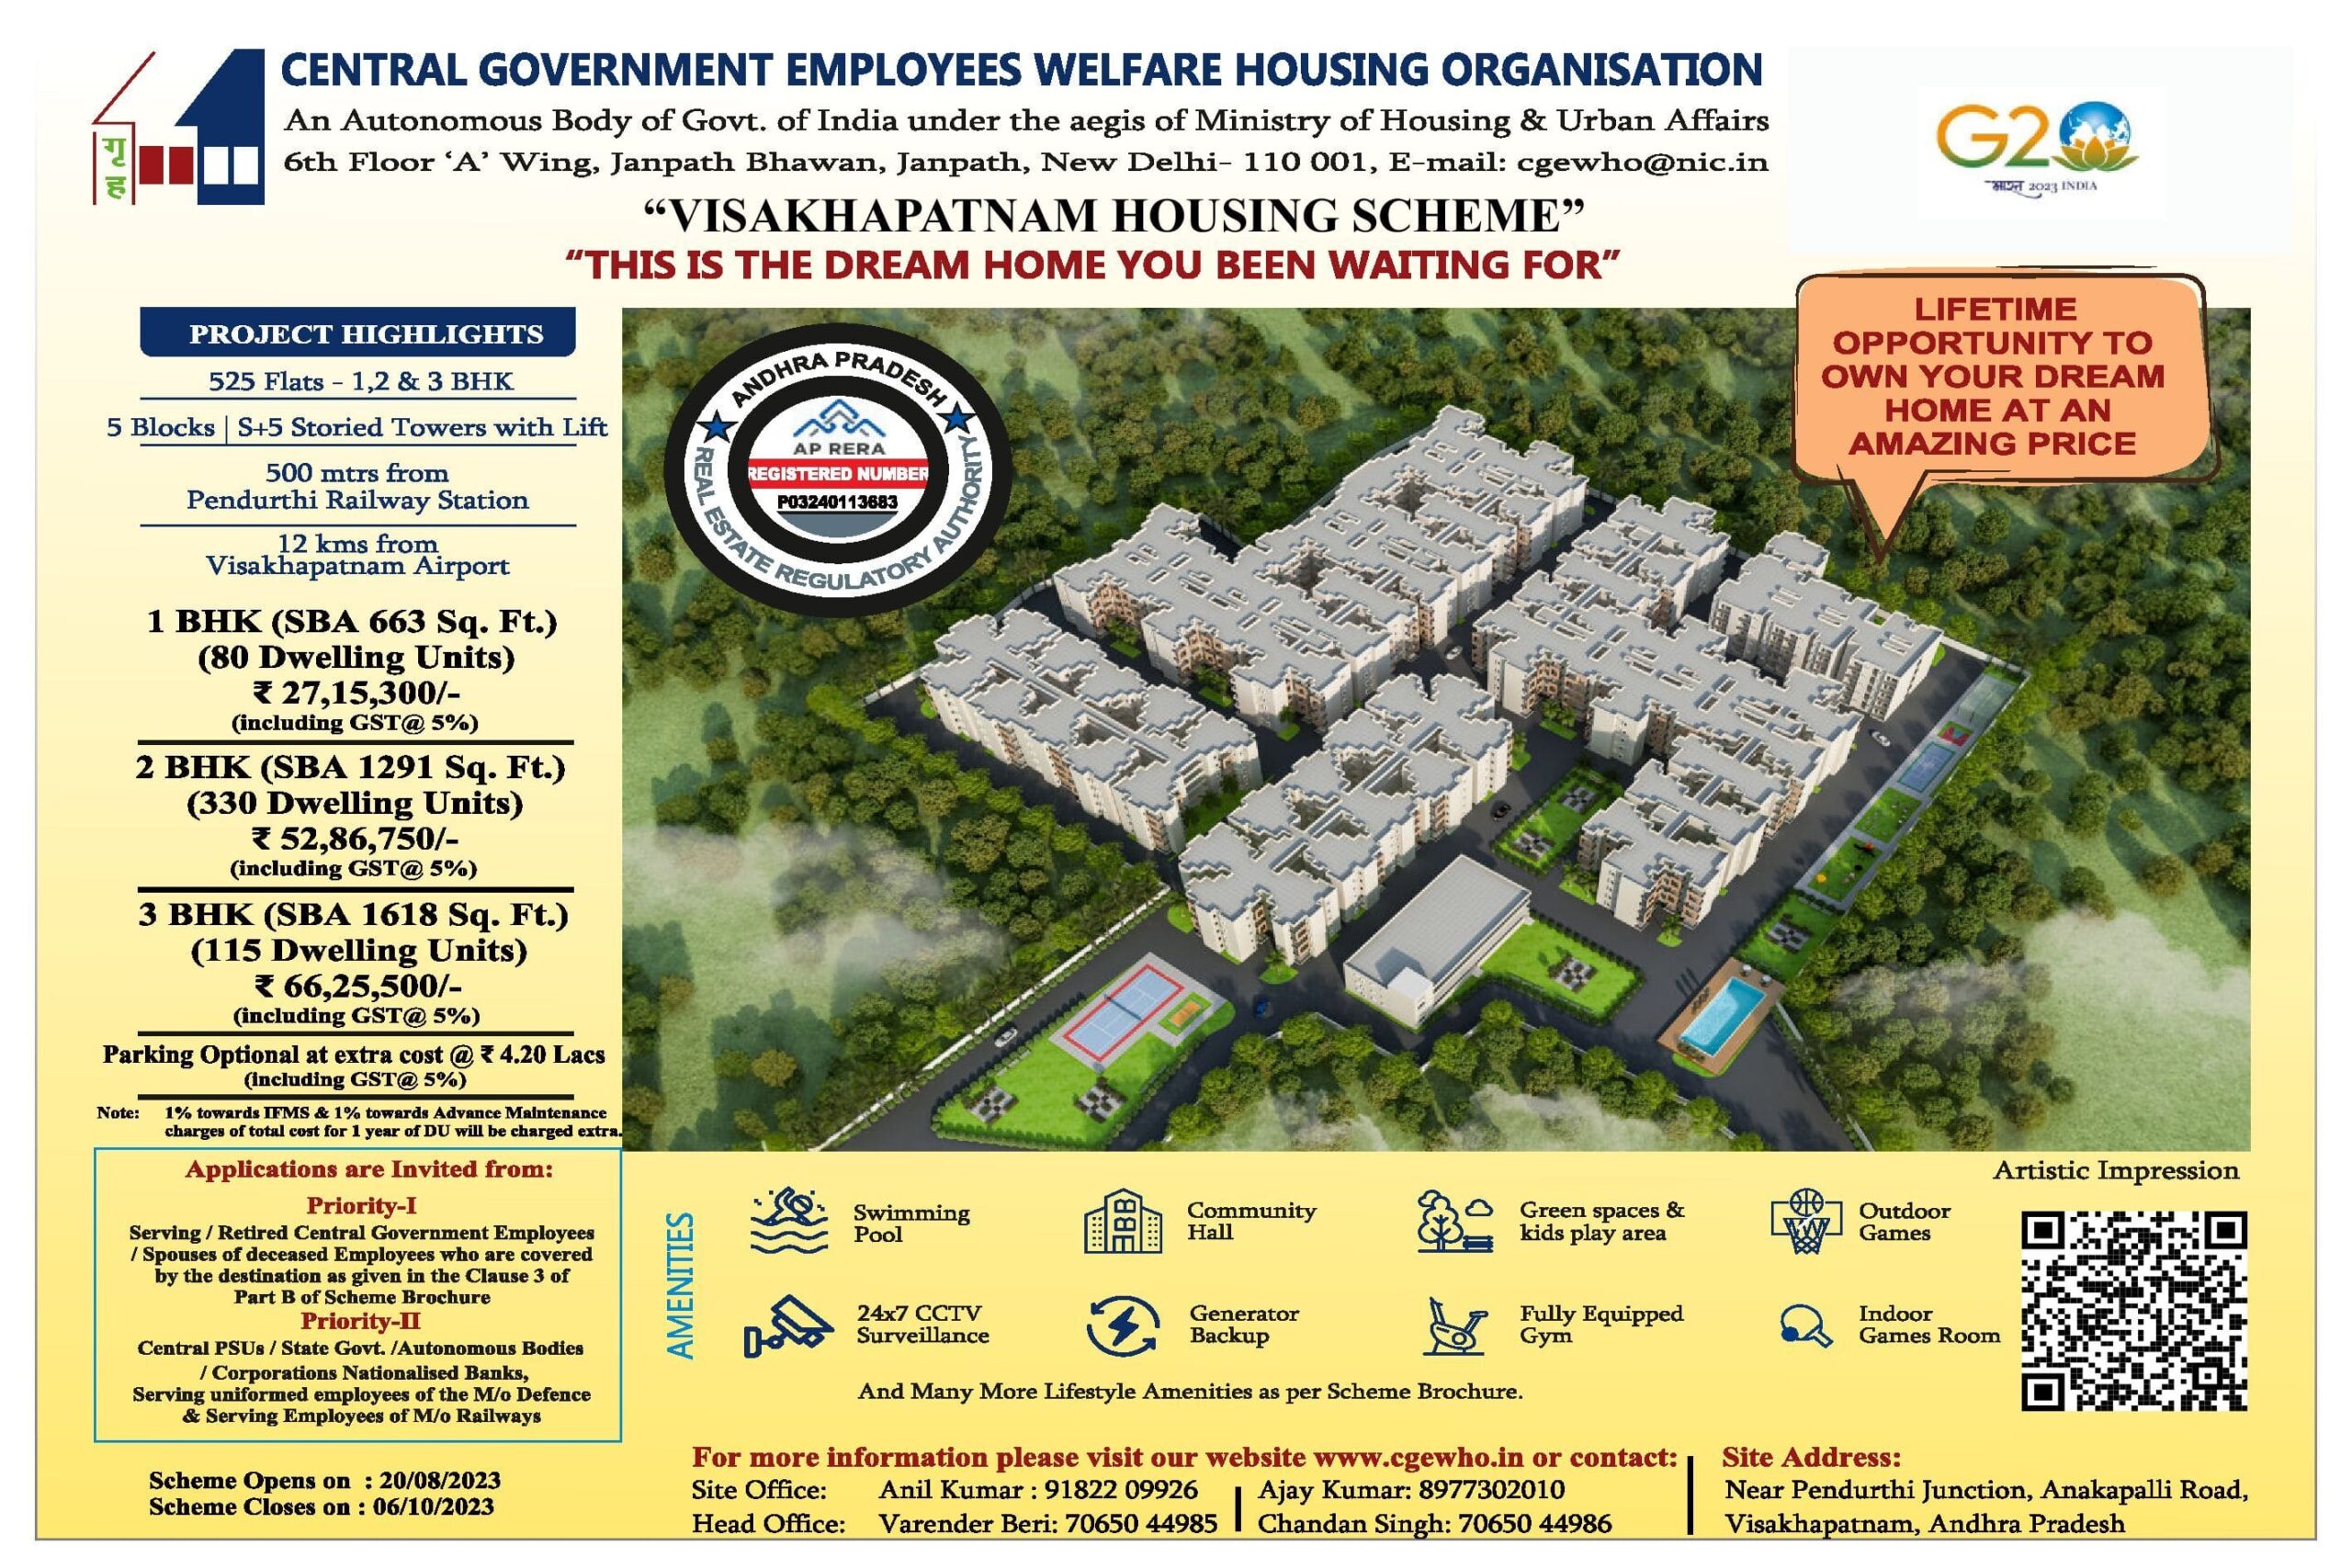 CGEWHO Visakhapatnam Housing Scheme – Open for subscription and Applications are invited 